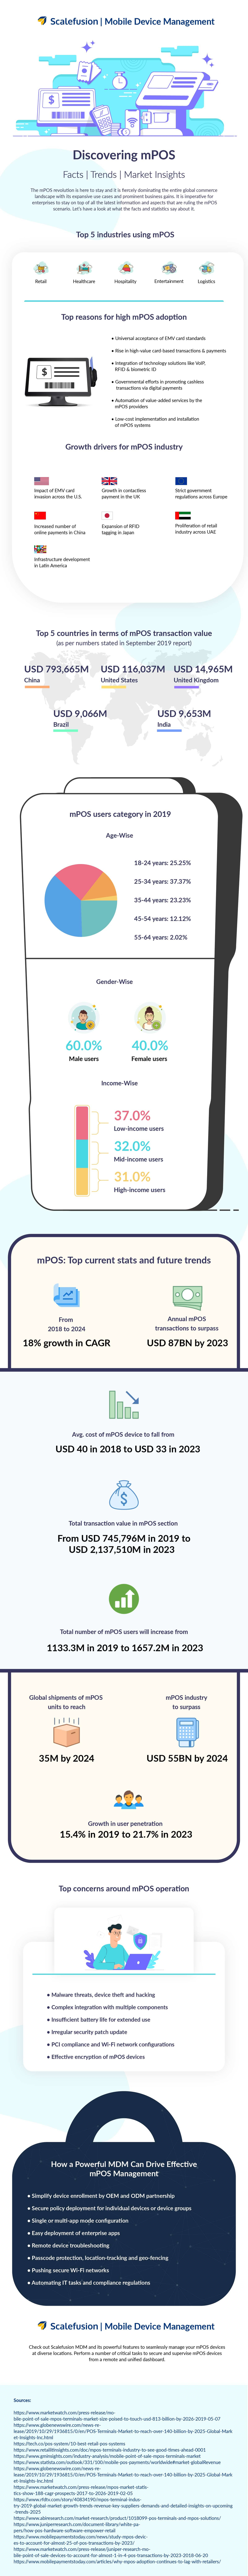 what is mobile pos - mobile marketing infographic